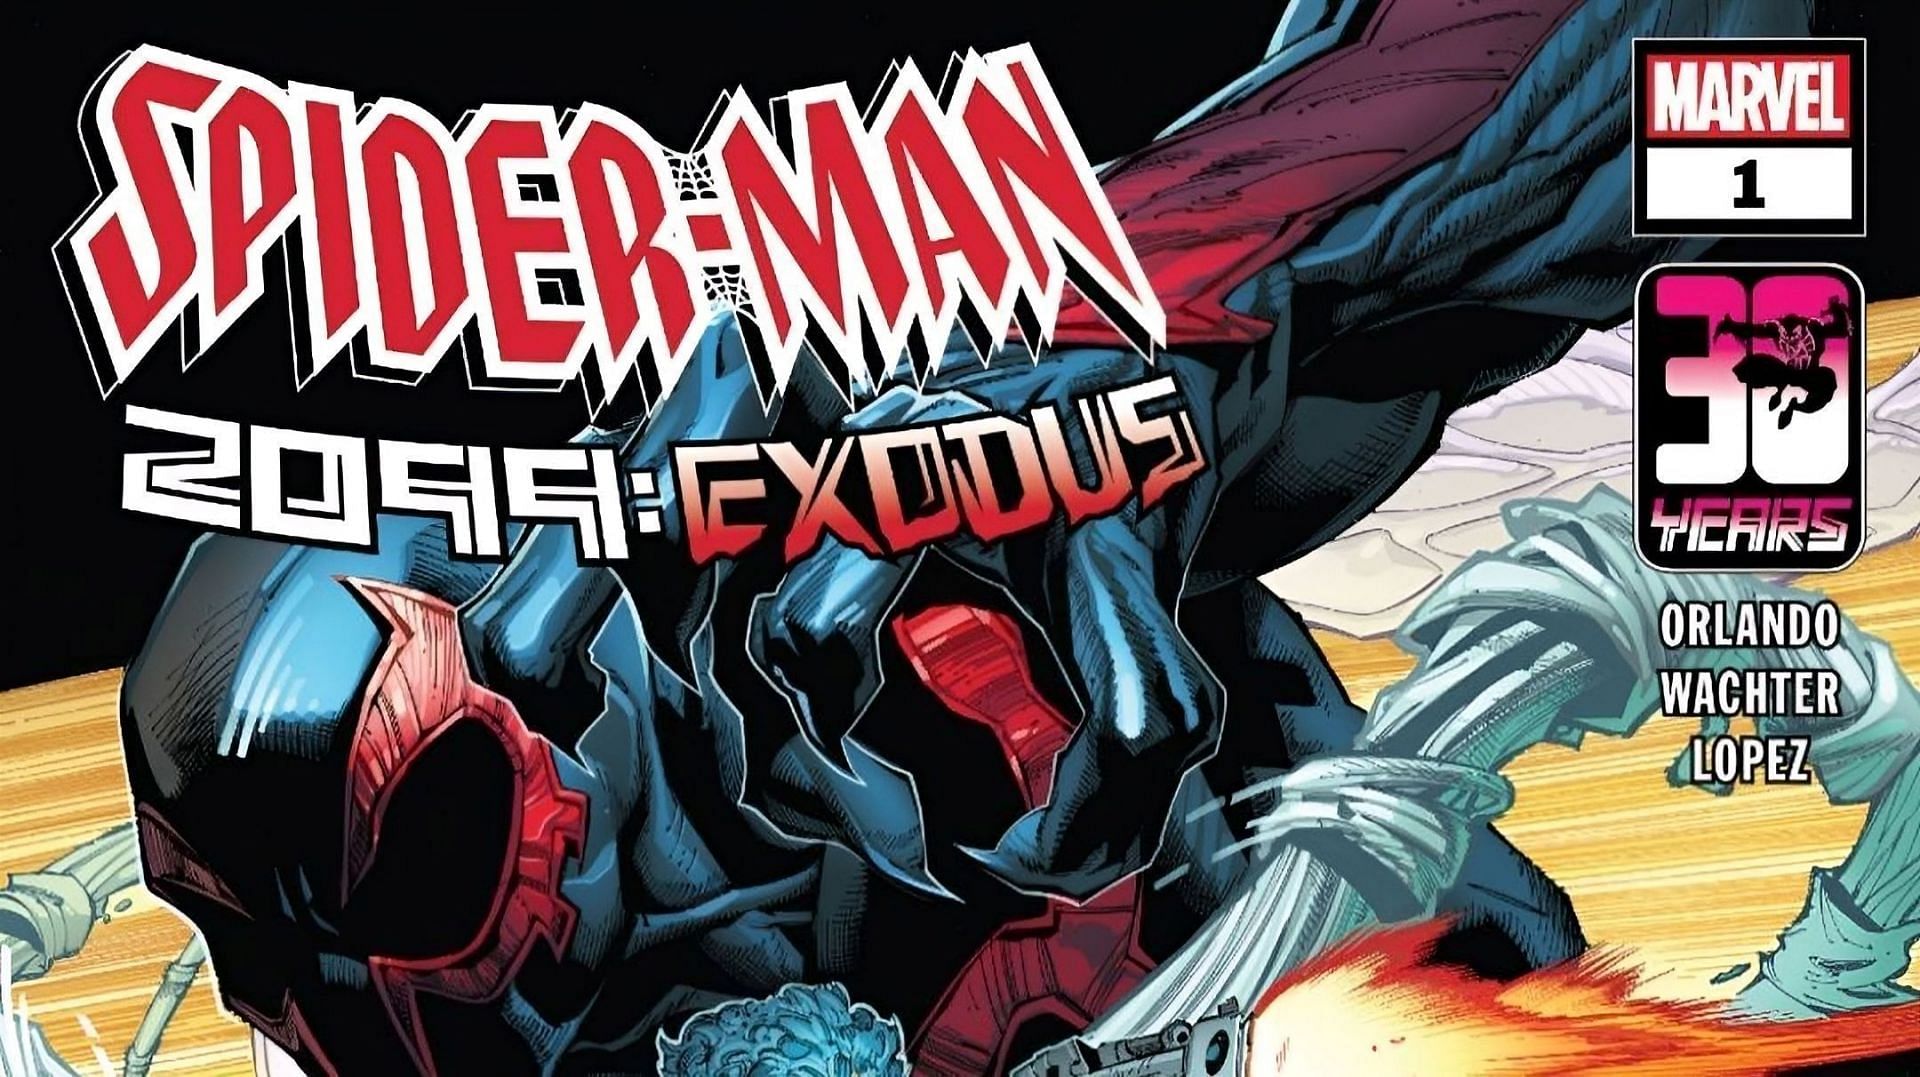 Spider-Man 2099: Exodus #1 Review - Winter Soldier takes the lead in a  convoluted story